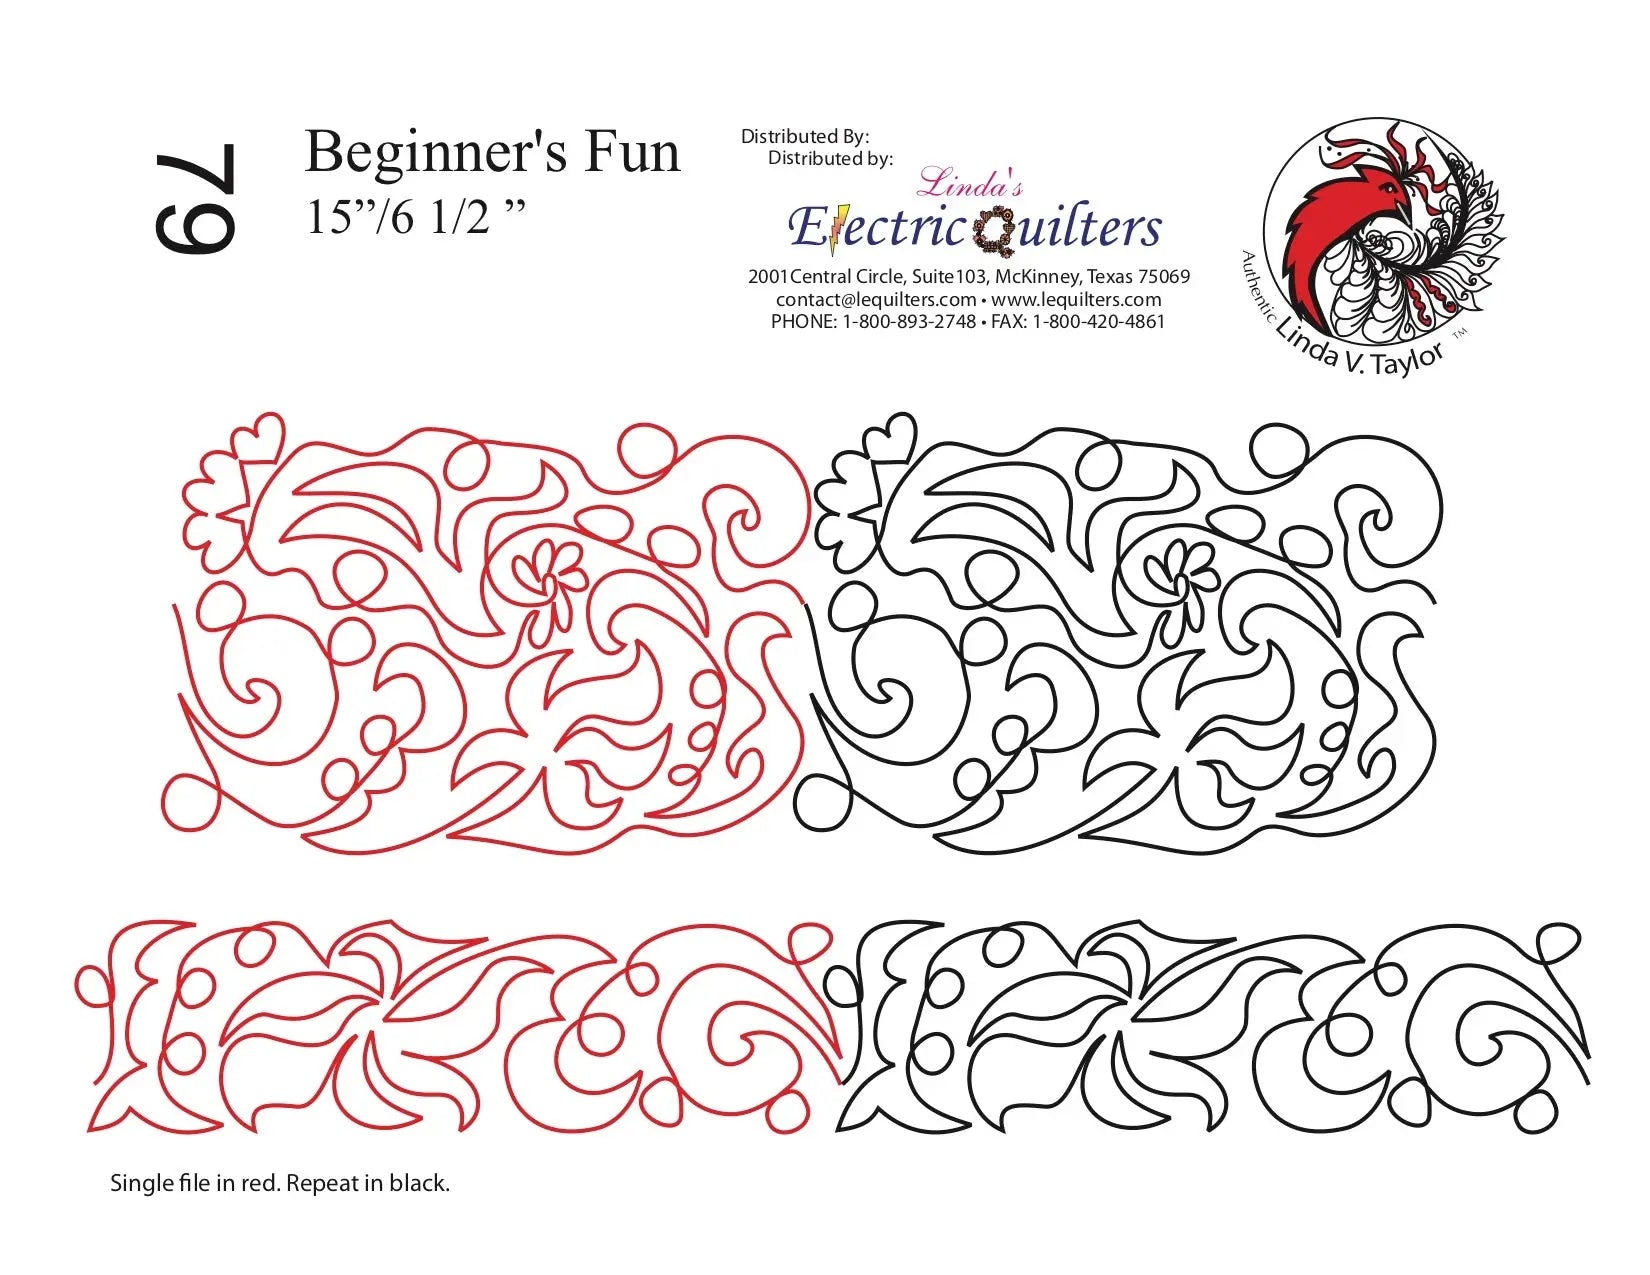 079 Beginners Fun Pantograph by Linda V. Taylor - Linda's Electric Quilters